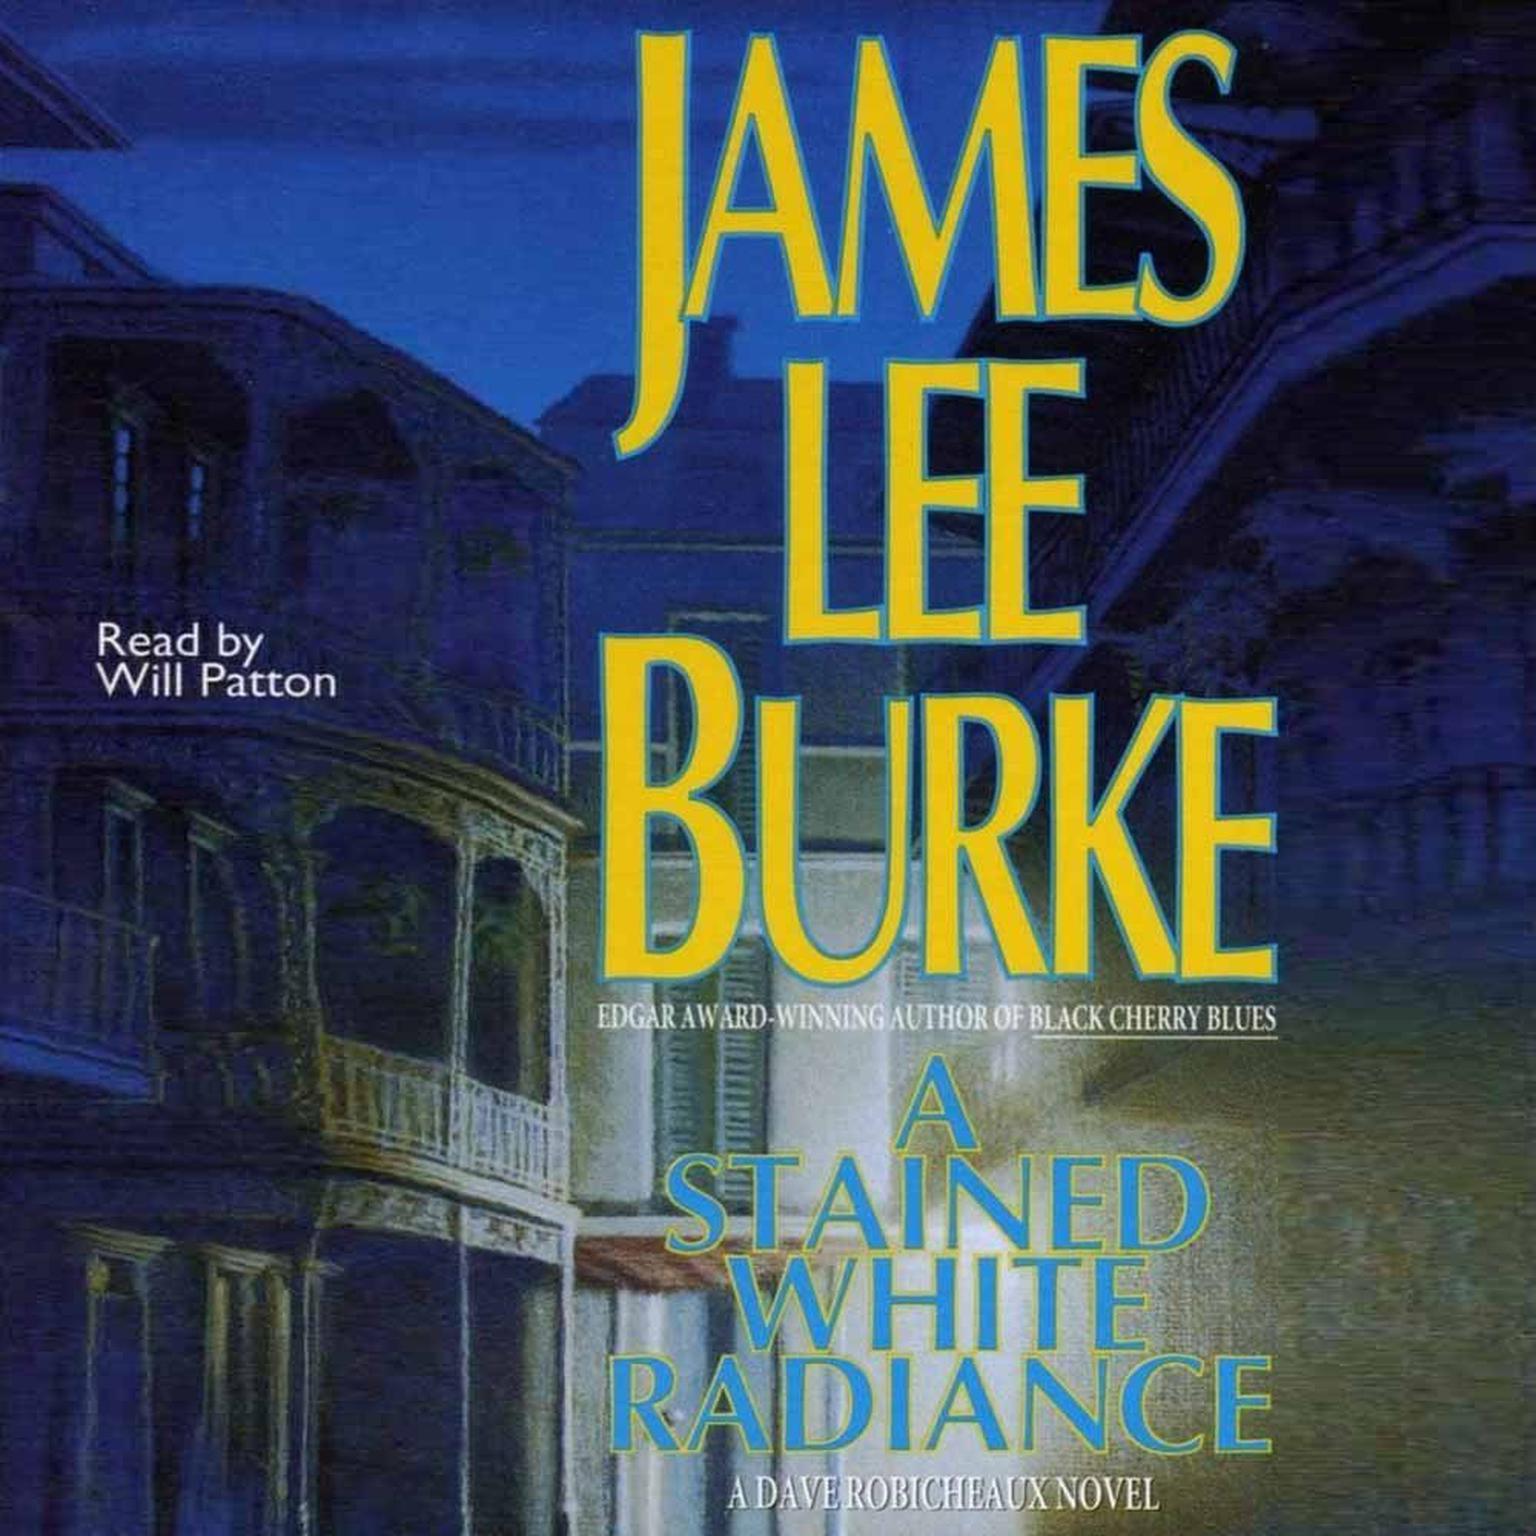 A Stained White Radiance (Abridged) Audiobook, by James Lee Burke